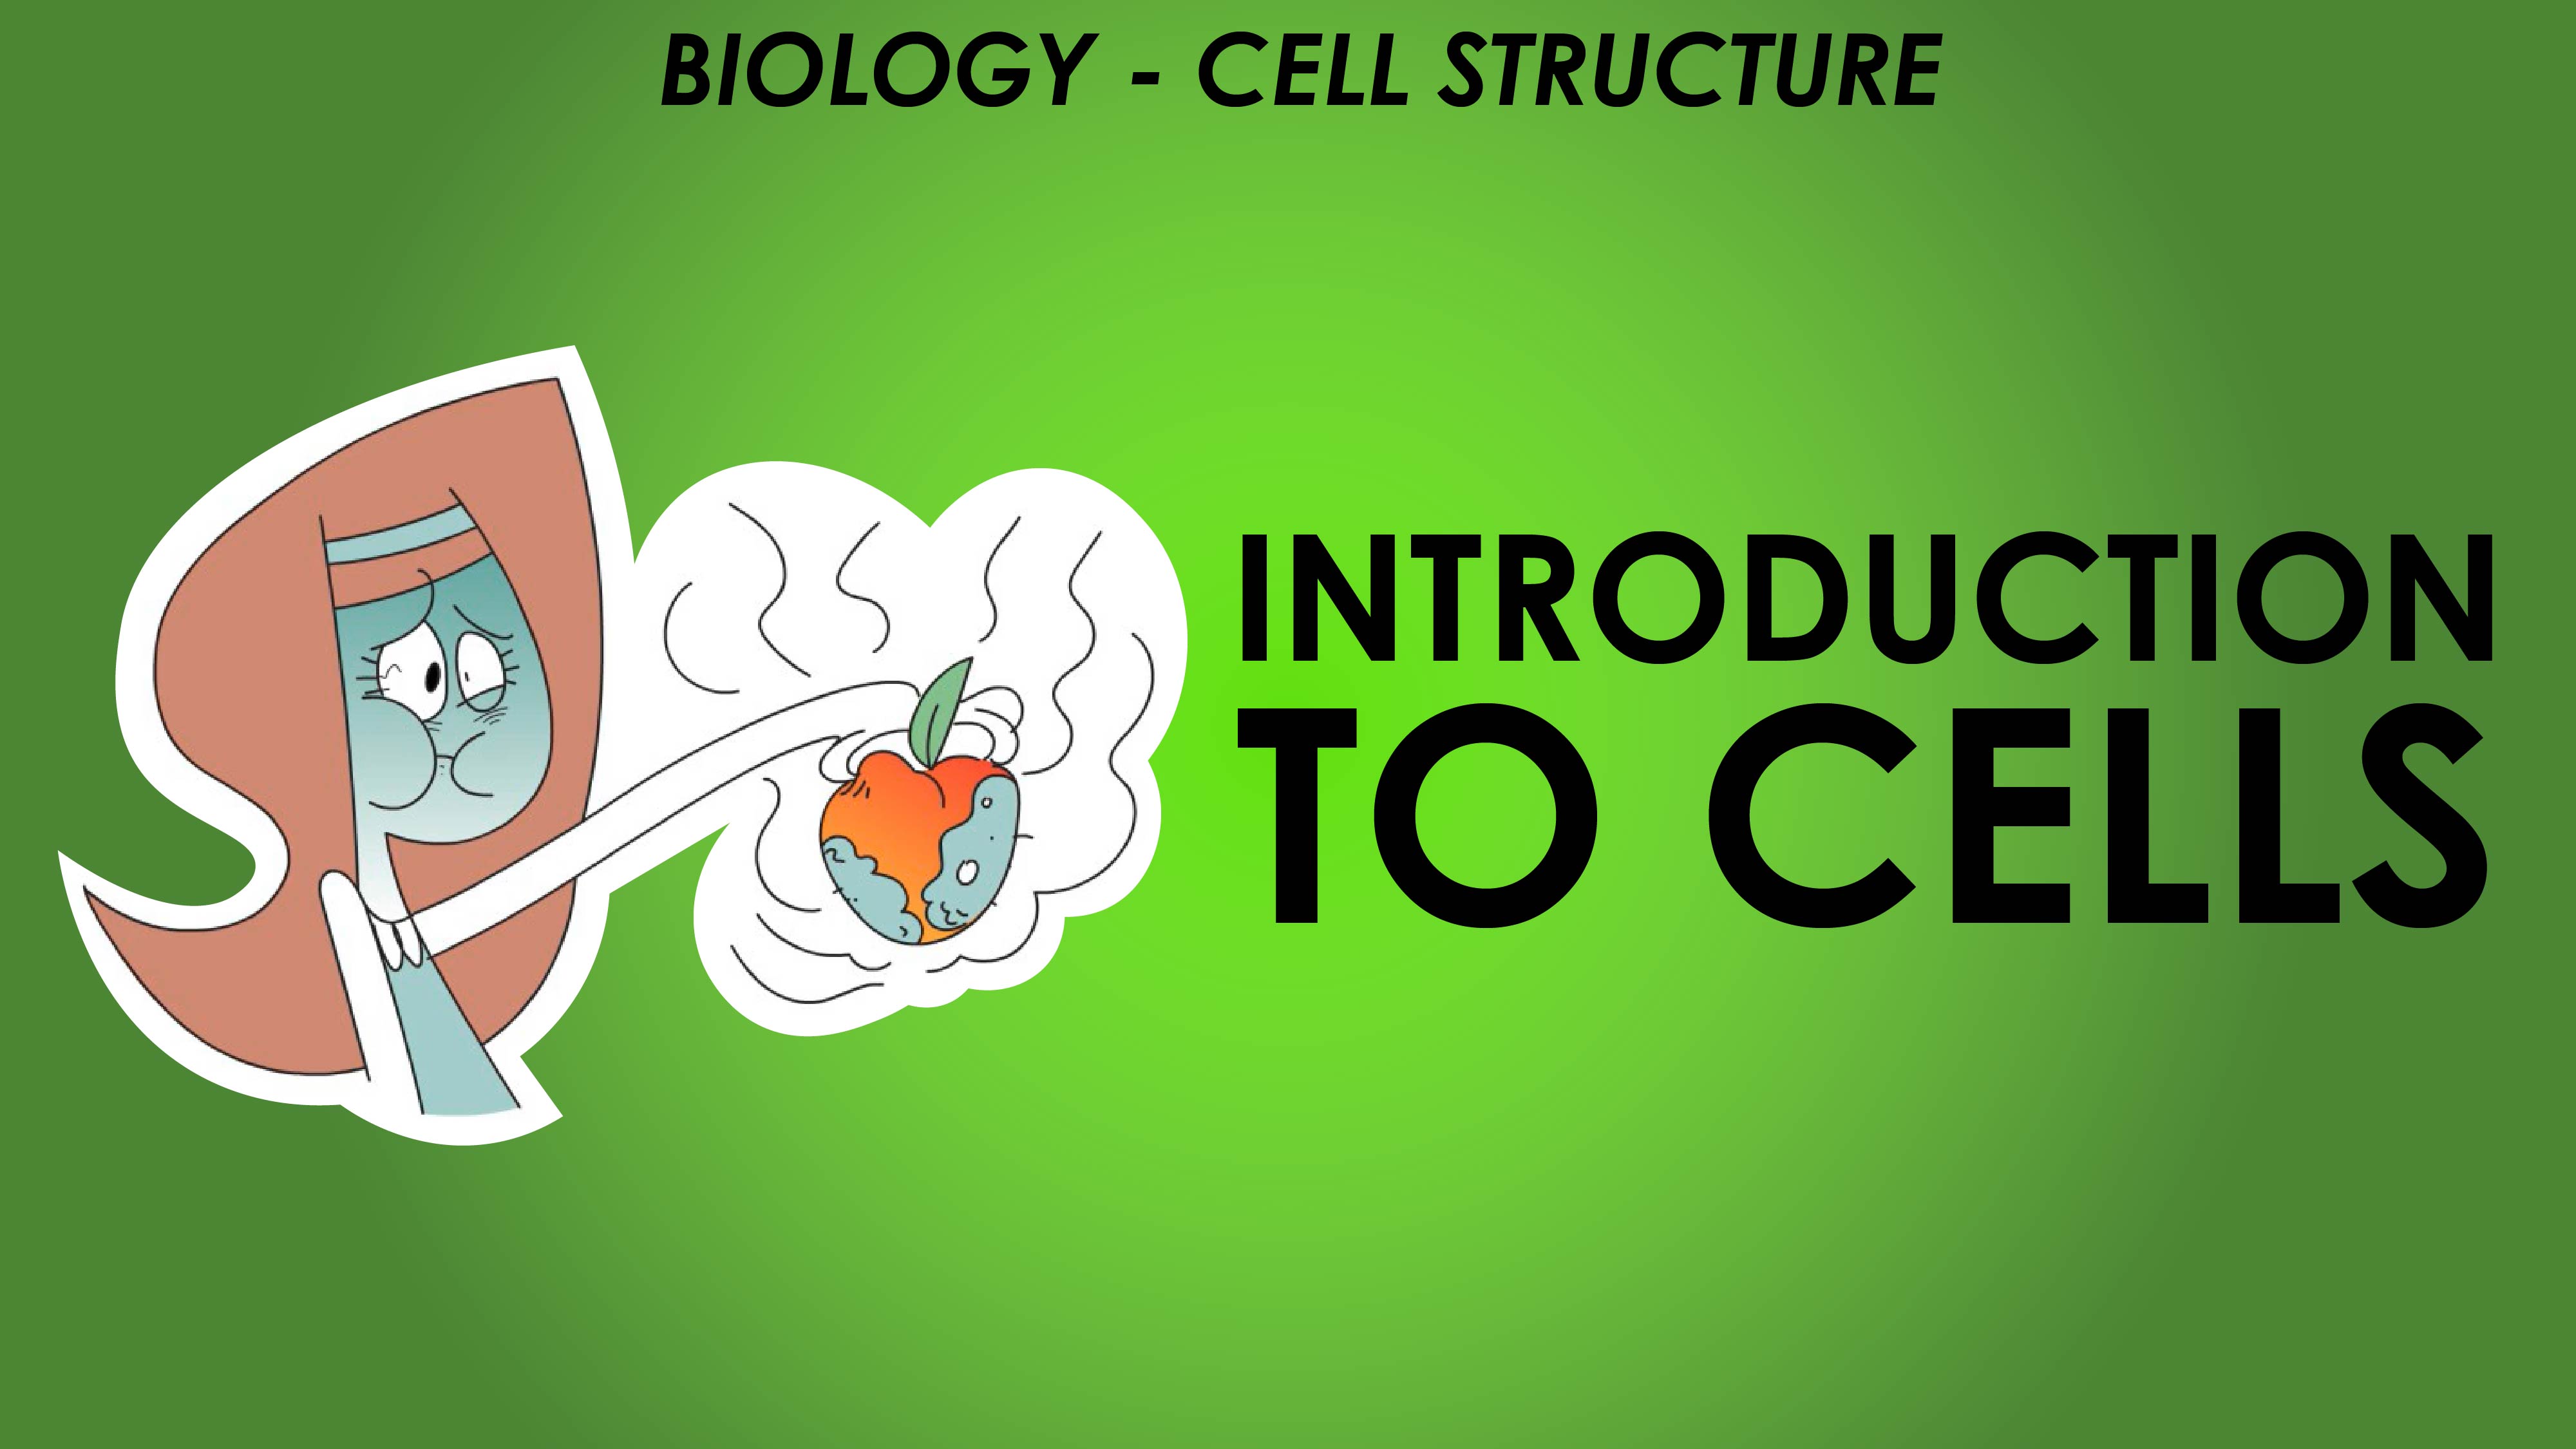 Introduction to Cells - Cell Structure